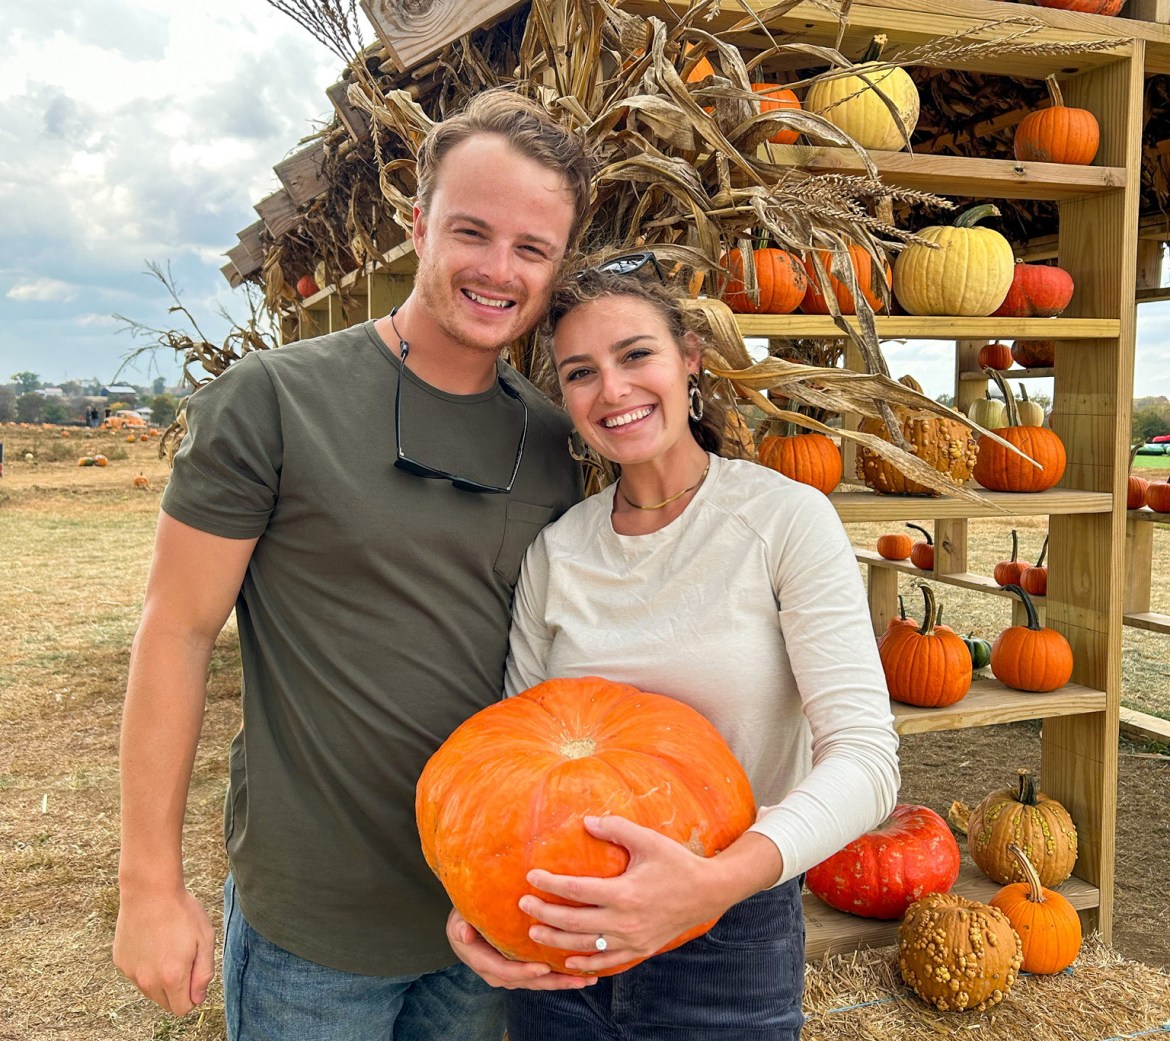 Alanna and Luke are standing together at a pumpkin patch. Alanna is holding a large pumpkin. Both are smiling at the camera.